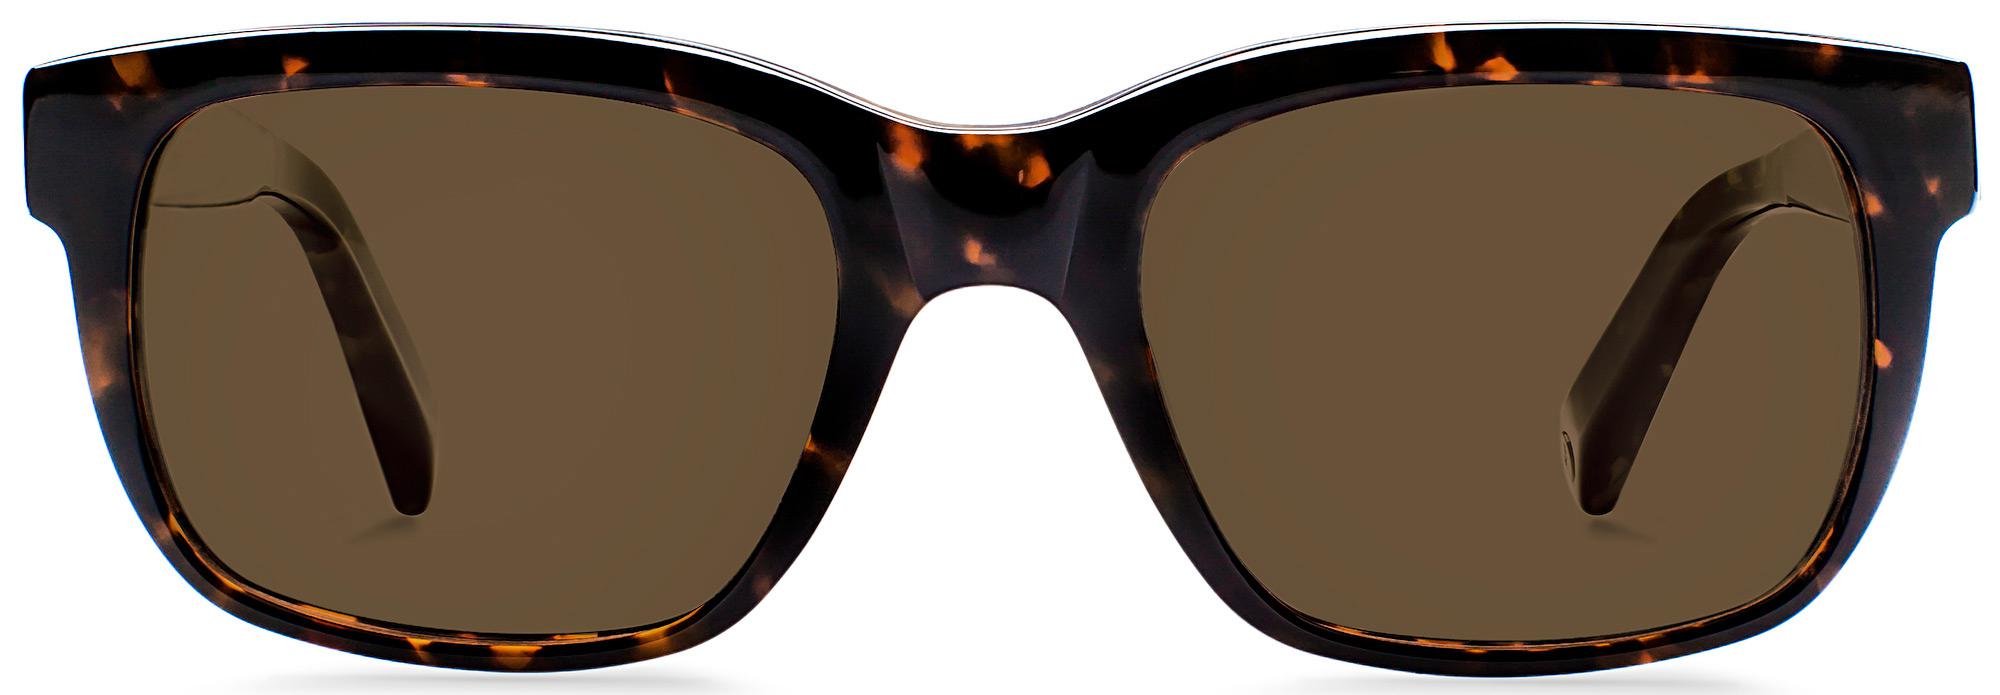 Paley Sunglasses in Whiskey Tortoise | Warby Parker